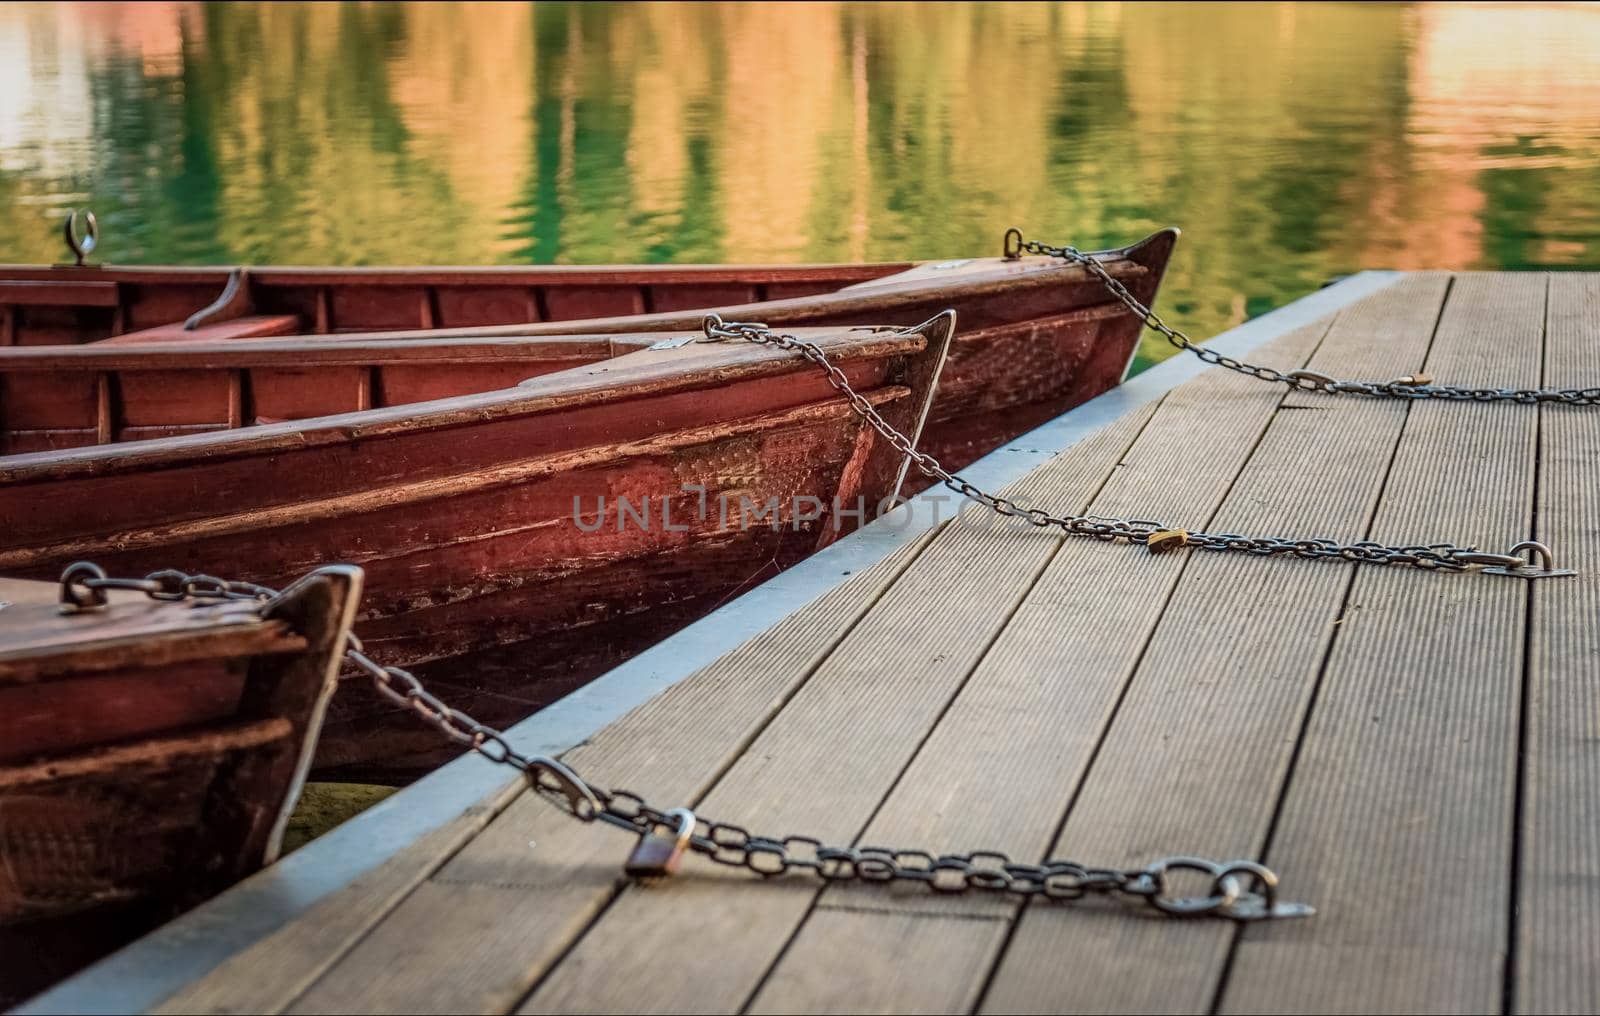 Boat chains on the dock, close up of boat chains, two wooden boats on the dock, Rope knots on the teak deck of a vintage wooden sailboat yacht